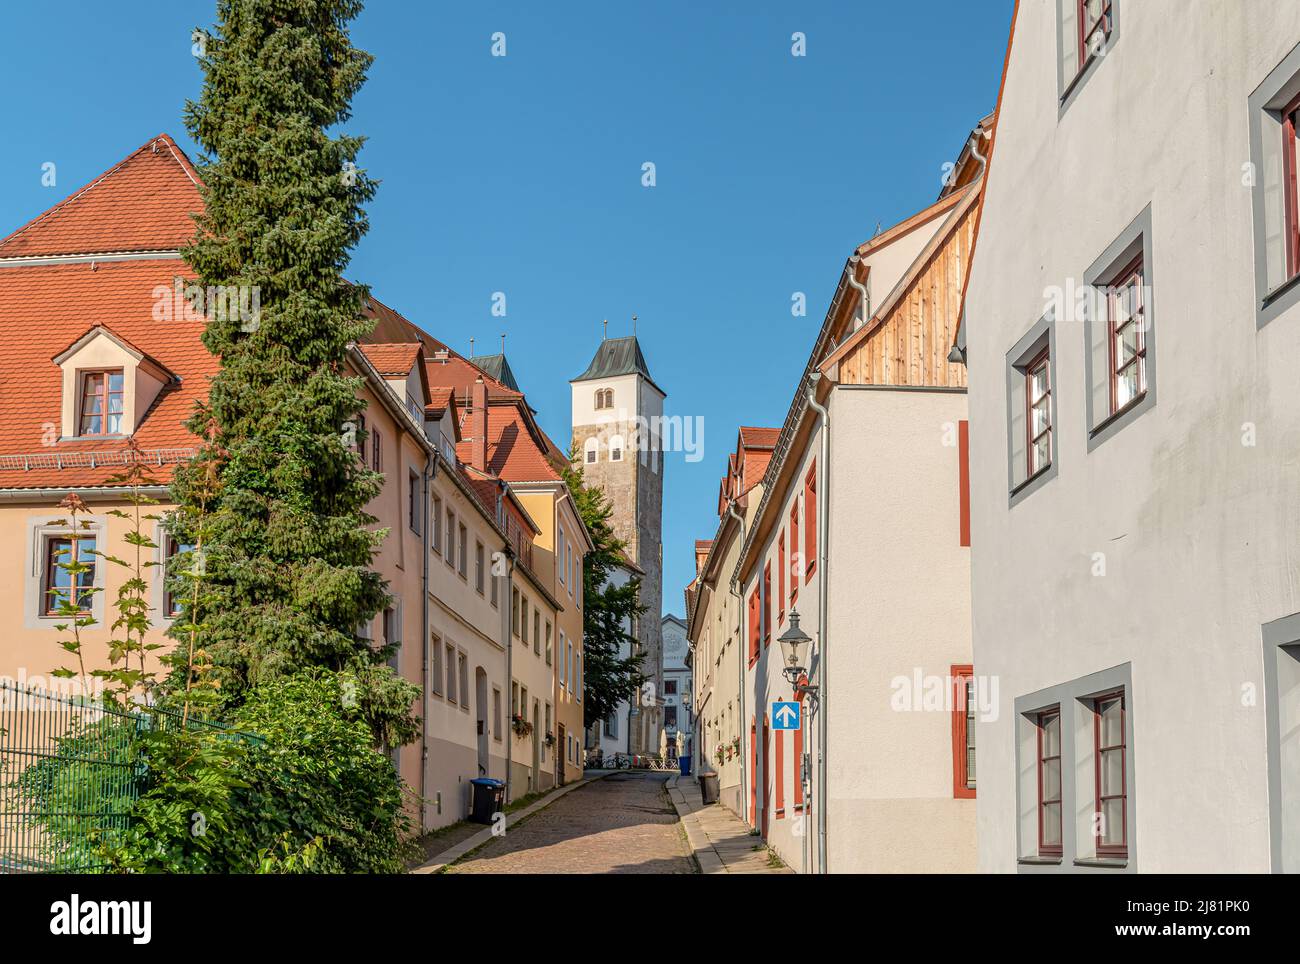 Nikolaigasse in the old town of Freiberg, with the Nikolaikirche in the background, Saxony, Germany Stock Photo